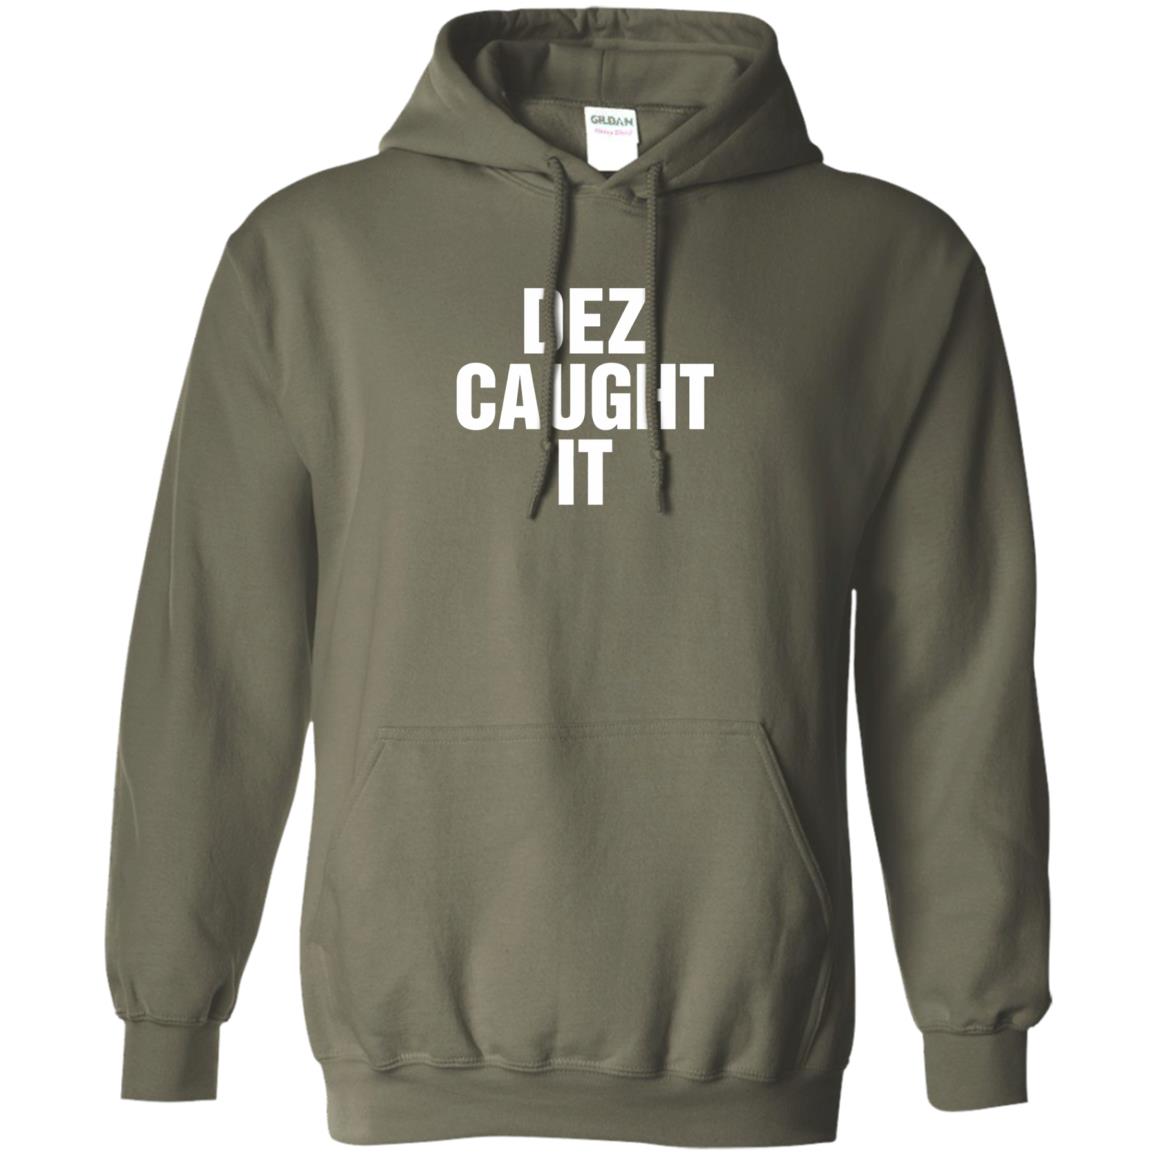 dez caught it hoodie - military green